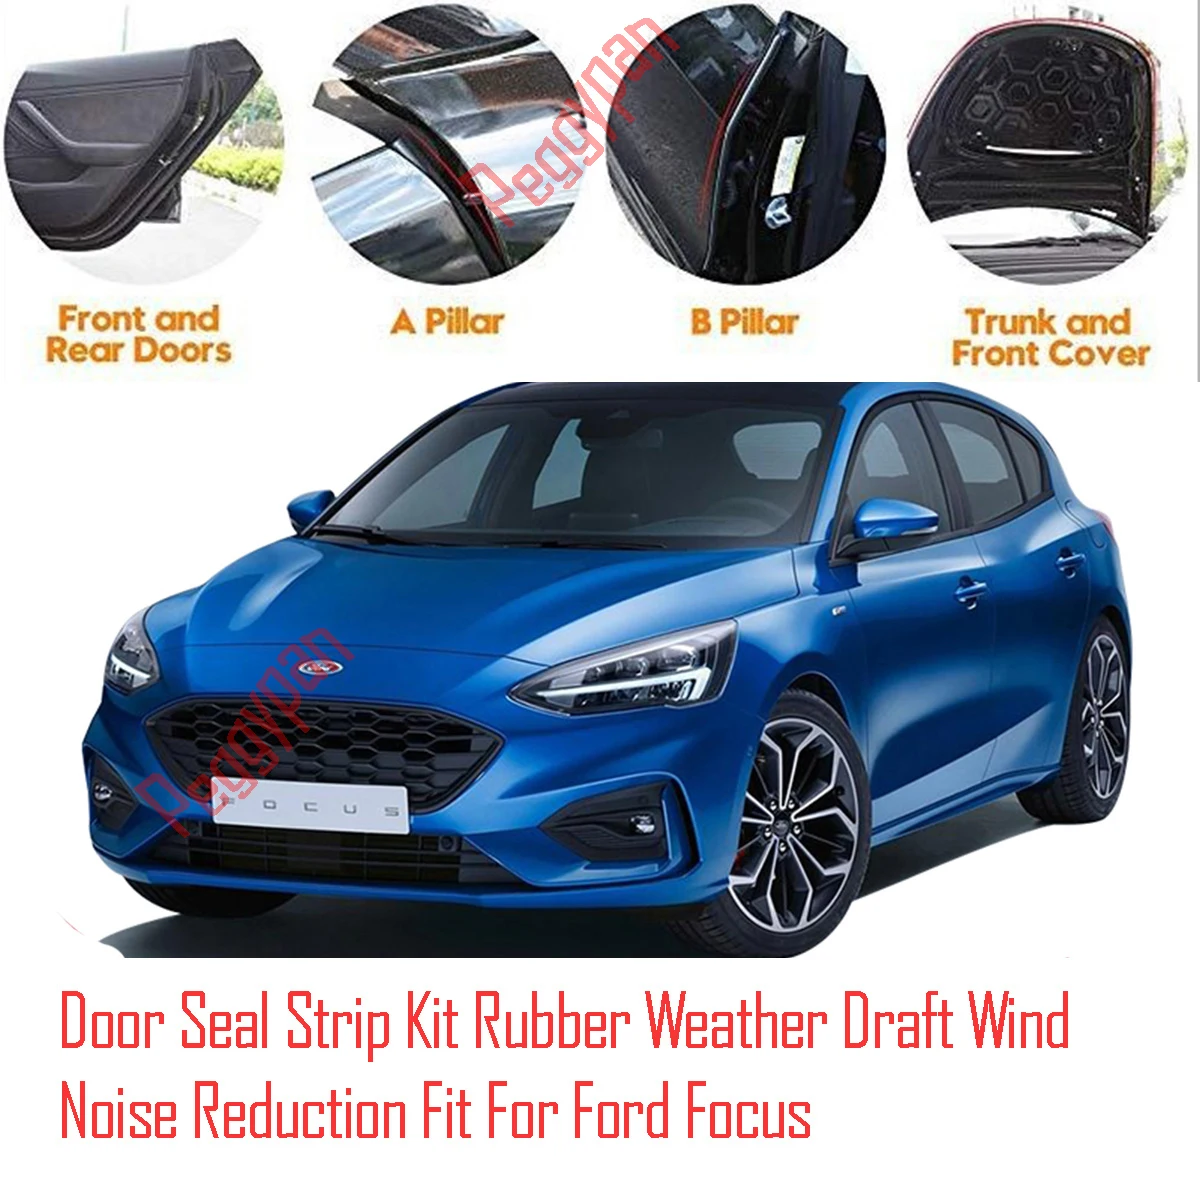 Door Seal Strip Kit Self Adhesive Window Engine Cover Soundproof Rubber Weather Draft Wind Noise Reduction Fit For Ford Focus 2